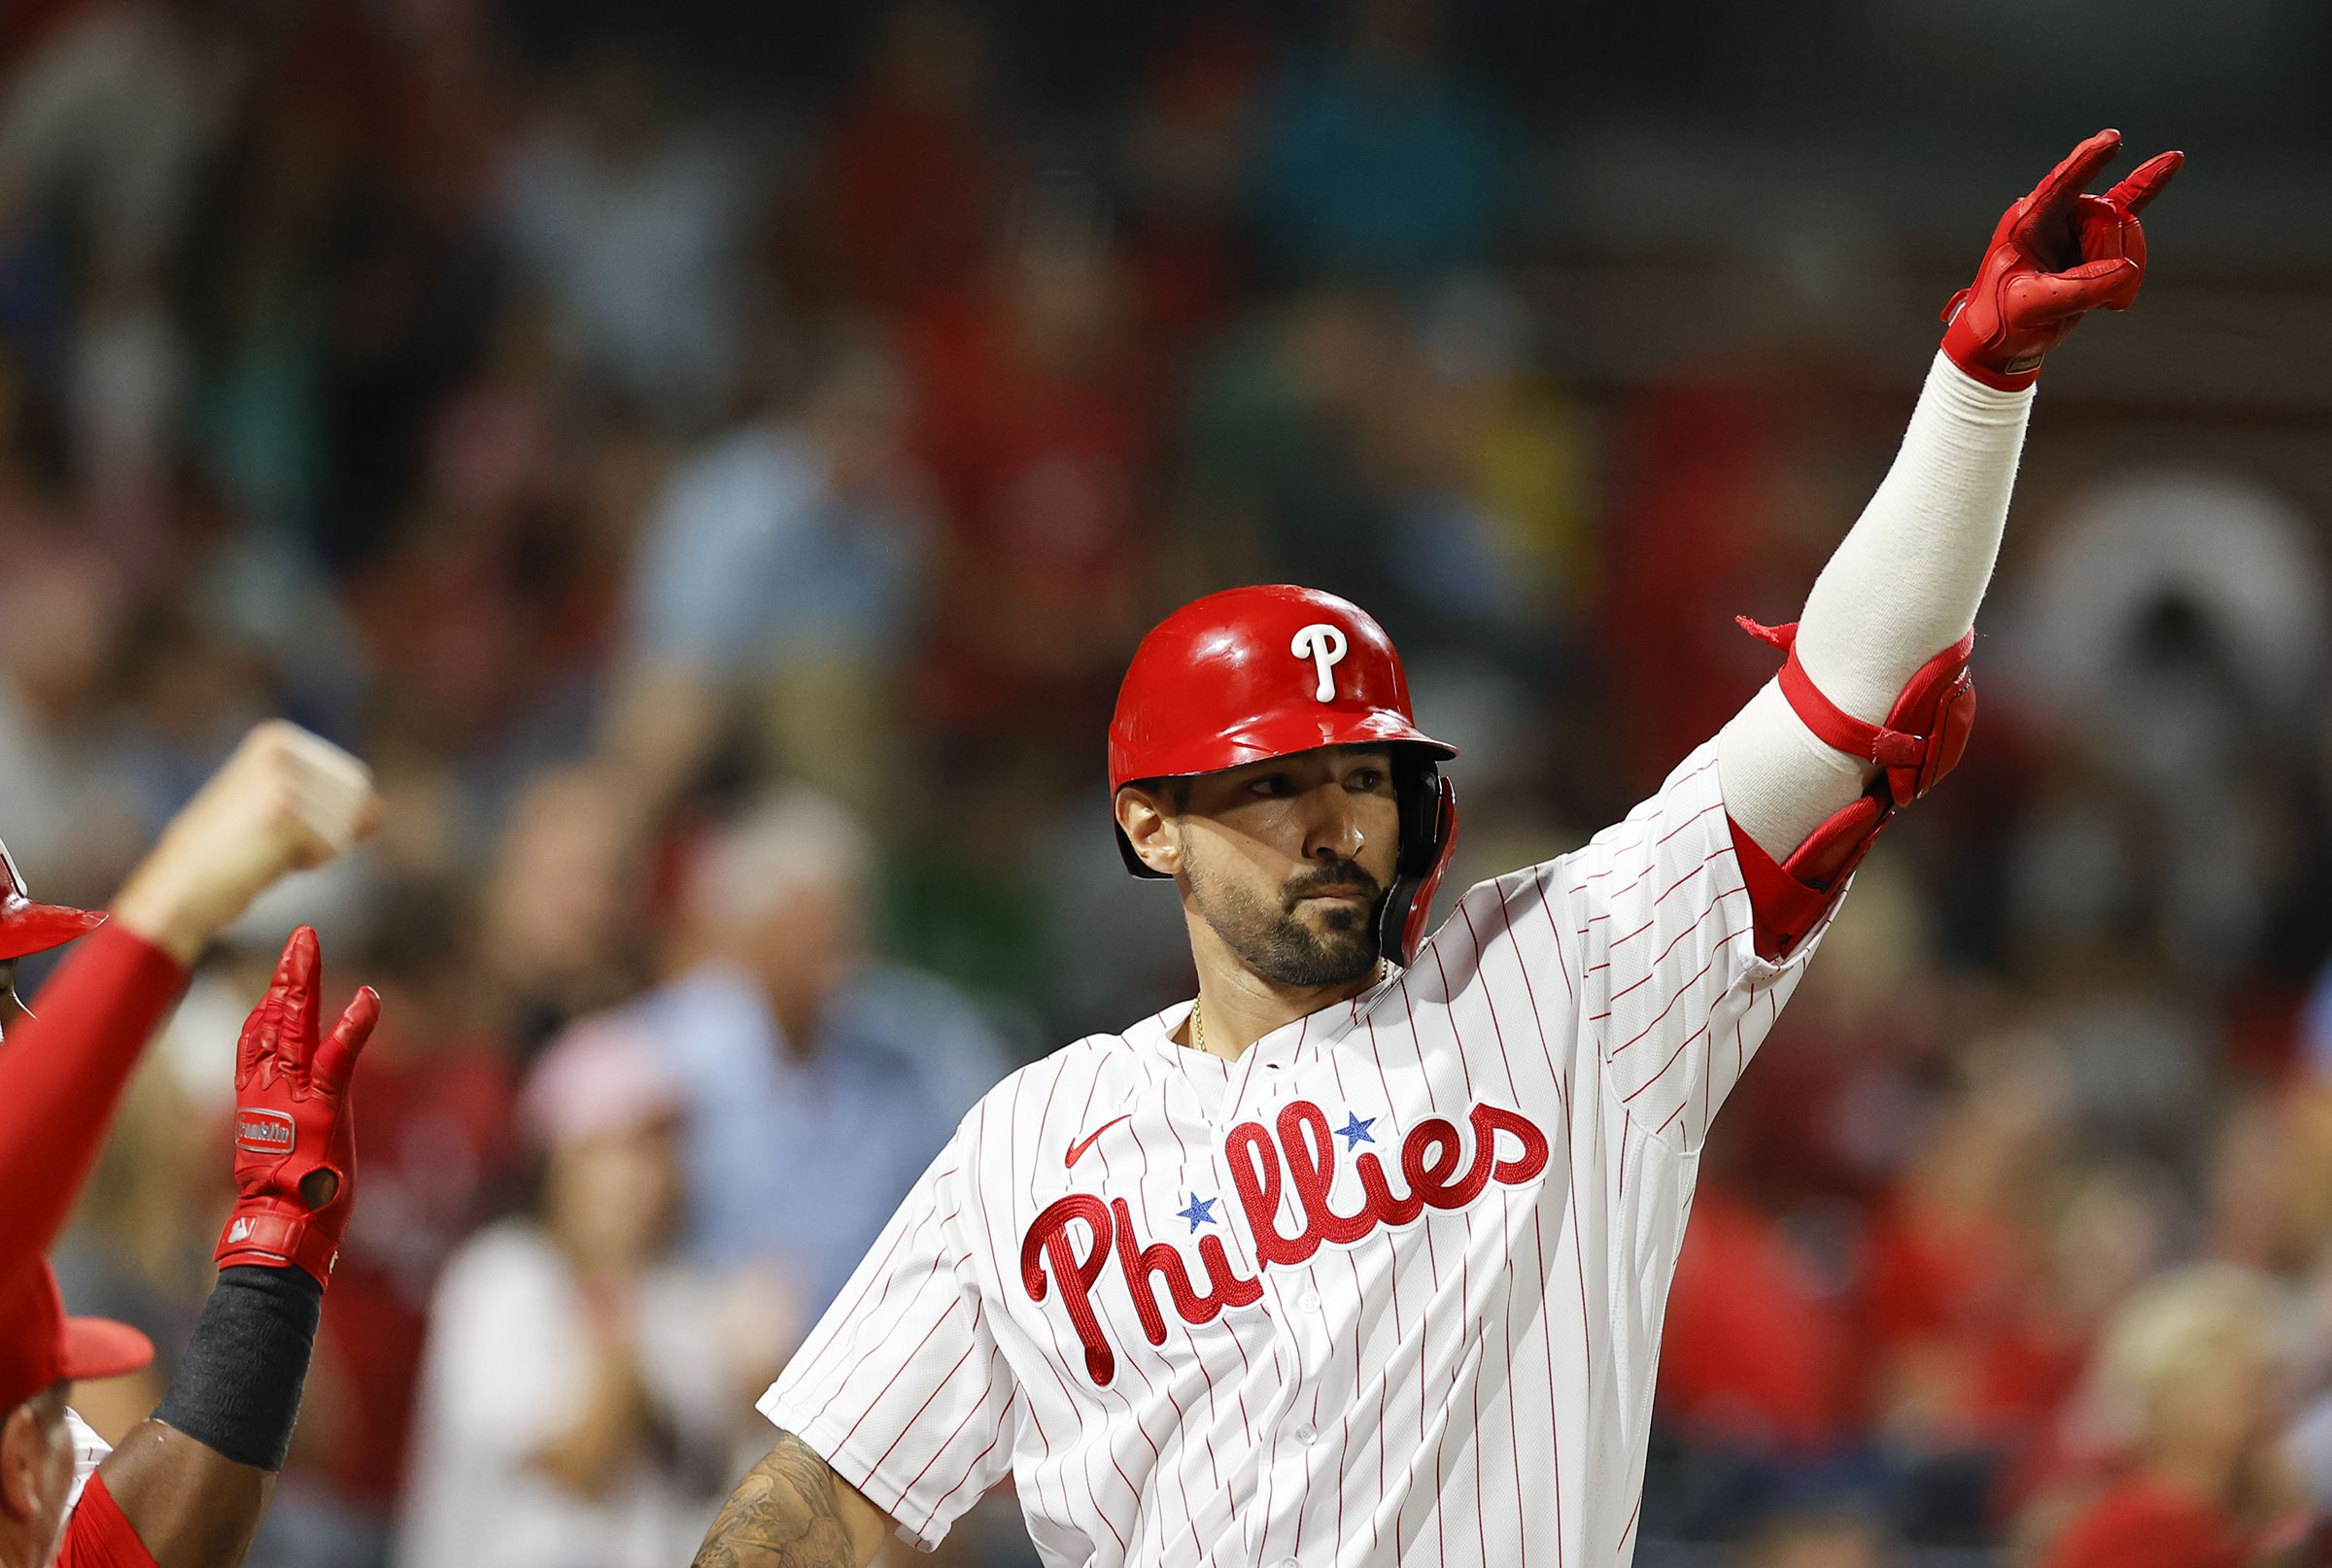 Nick Castellanos hopes to experience with Phillies what has been missing in  his career: Winning